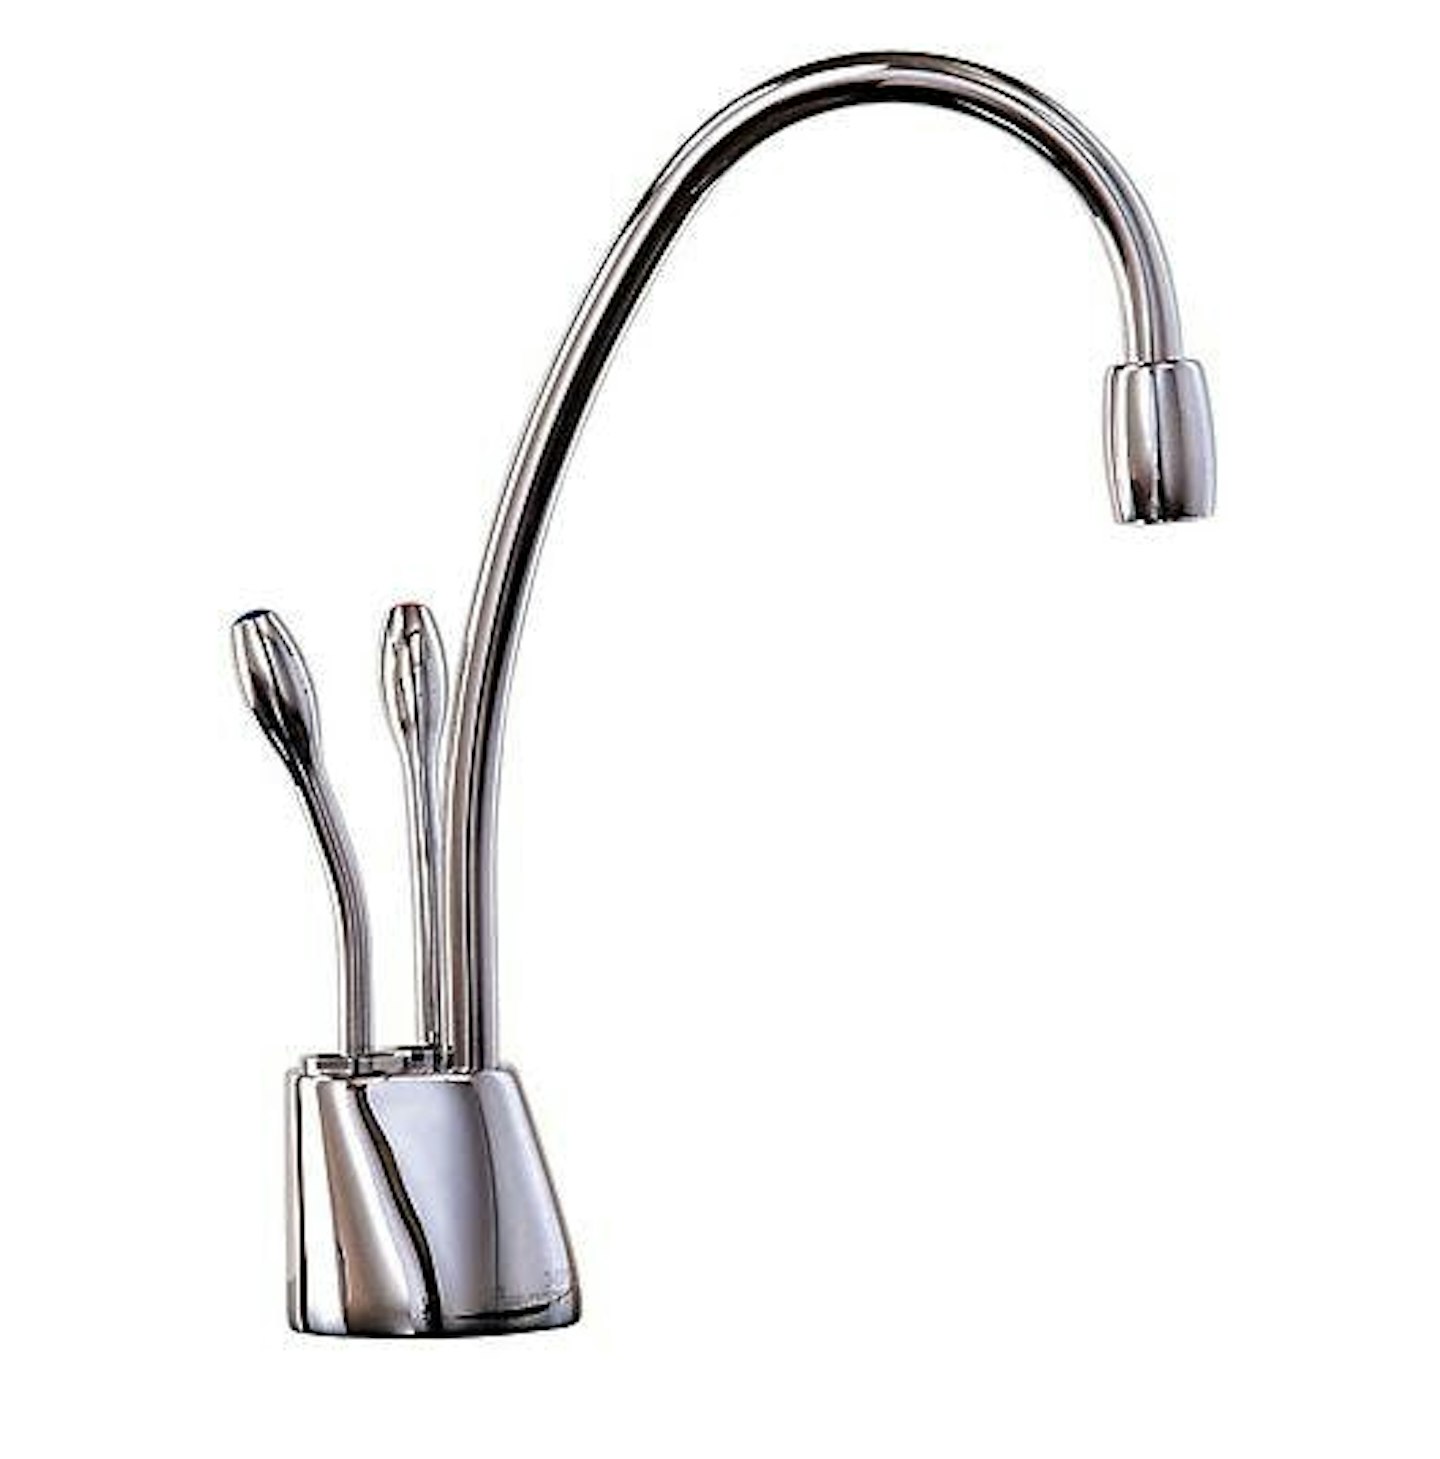 Best boiling water taps: InSinkErator Chrome Effect Filtered Hot and Cold Water Tap